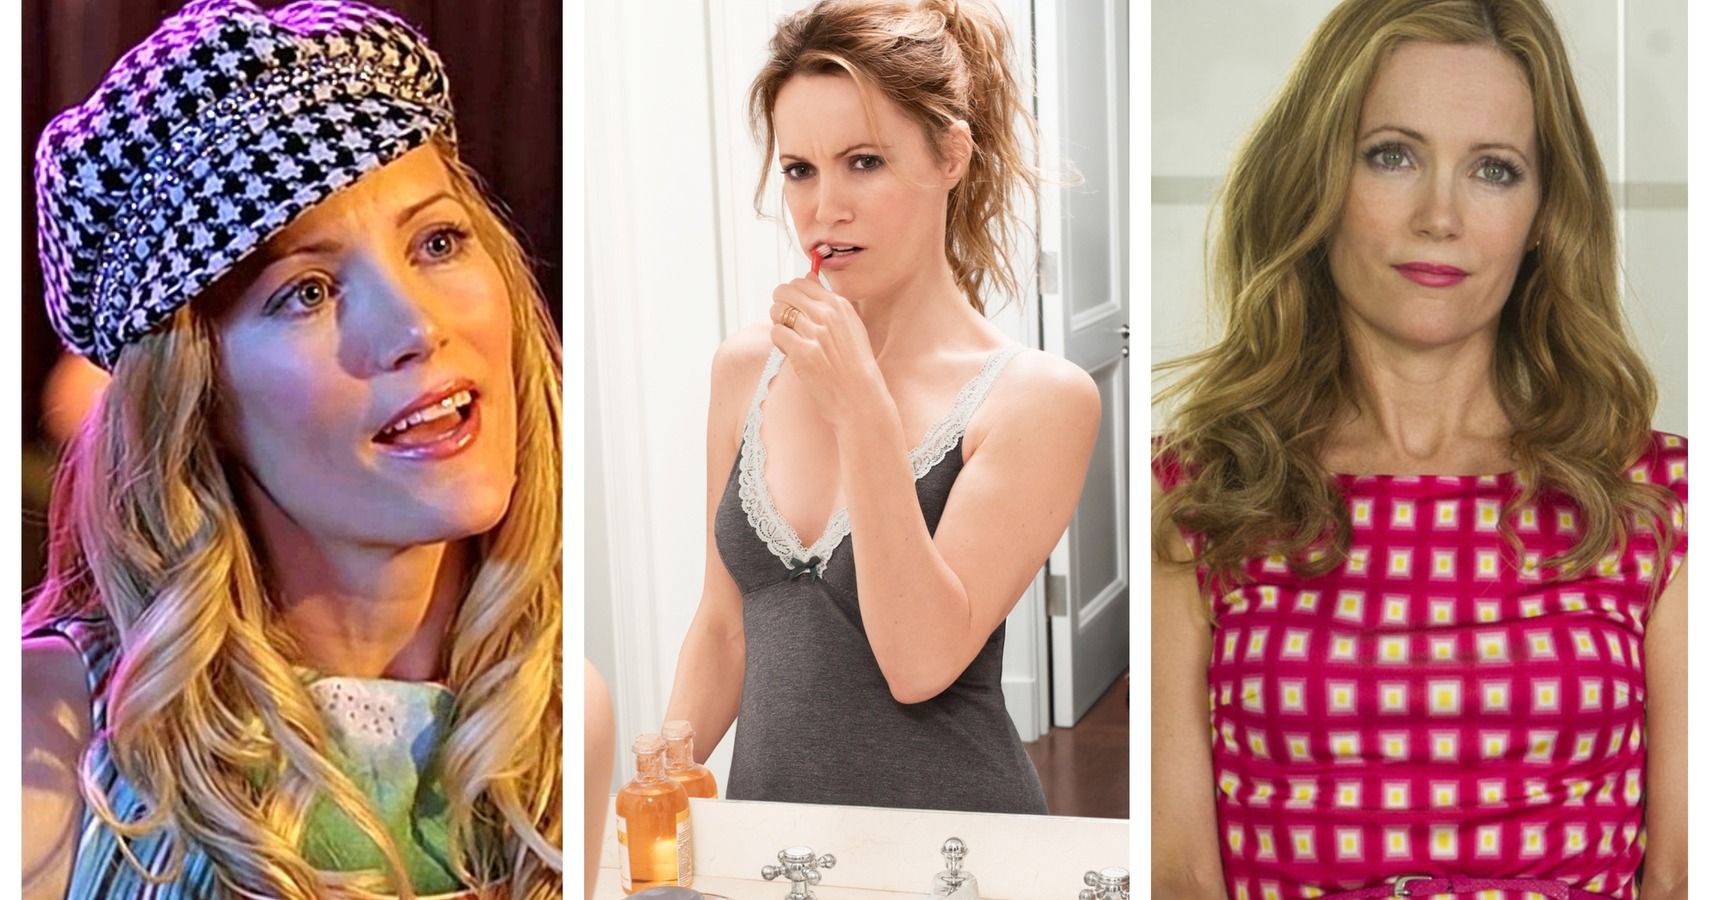 Leslie Mann's 10 Most Iconic Roles, Ranked According to IMDb